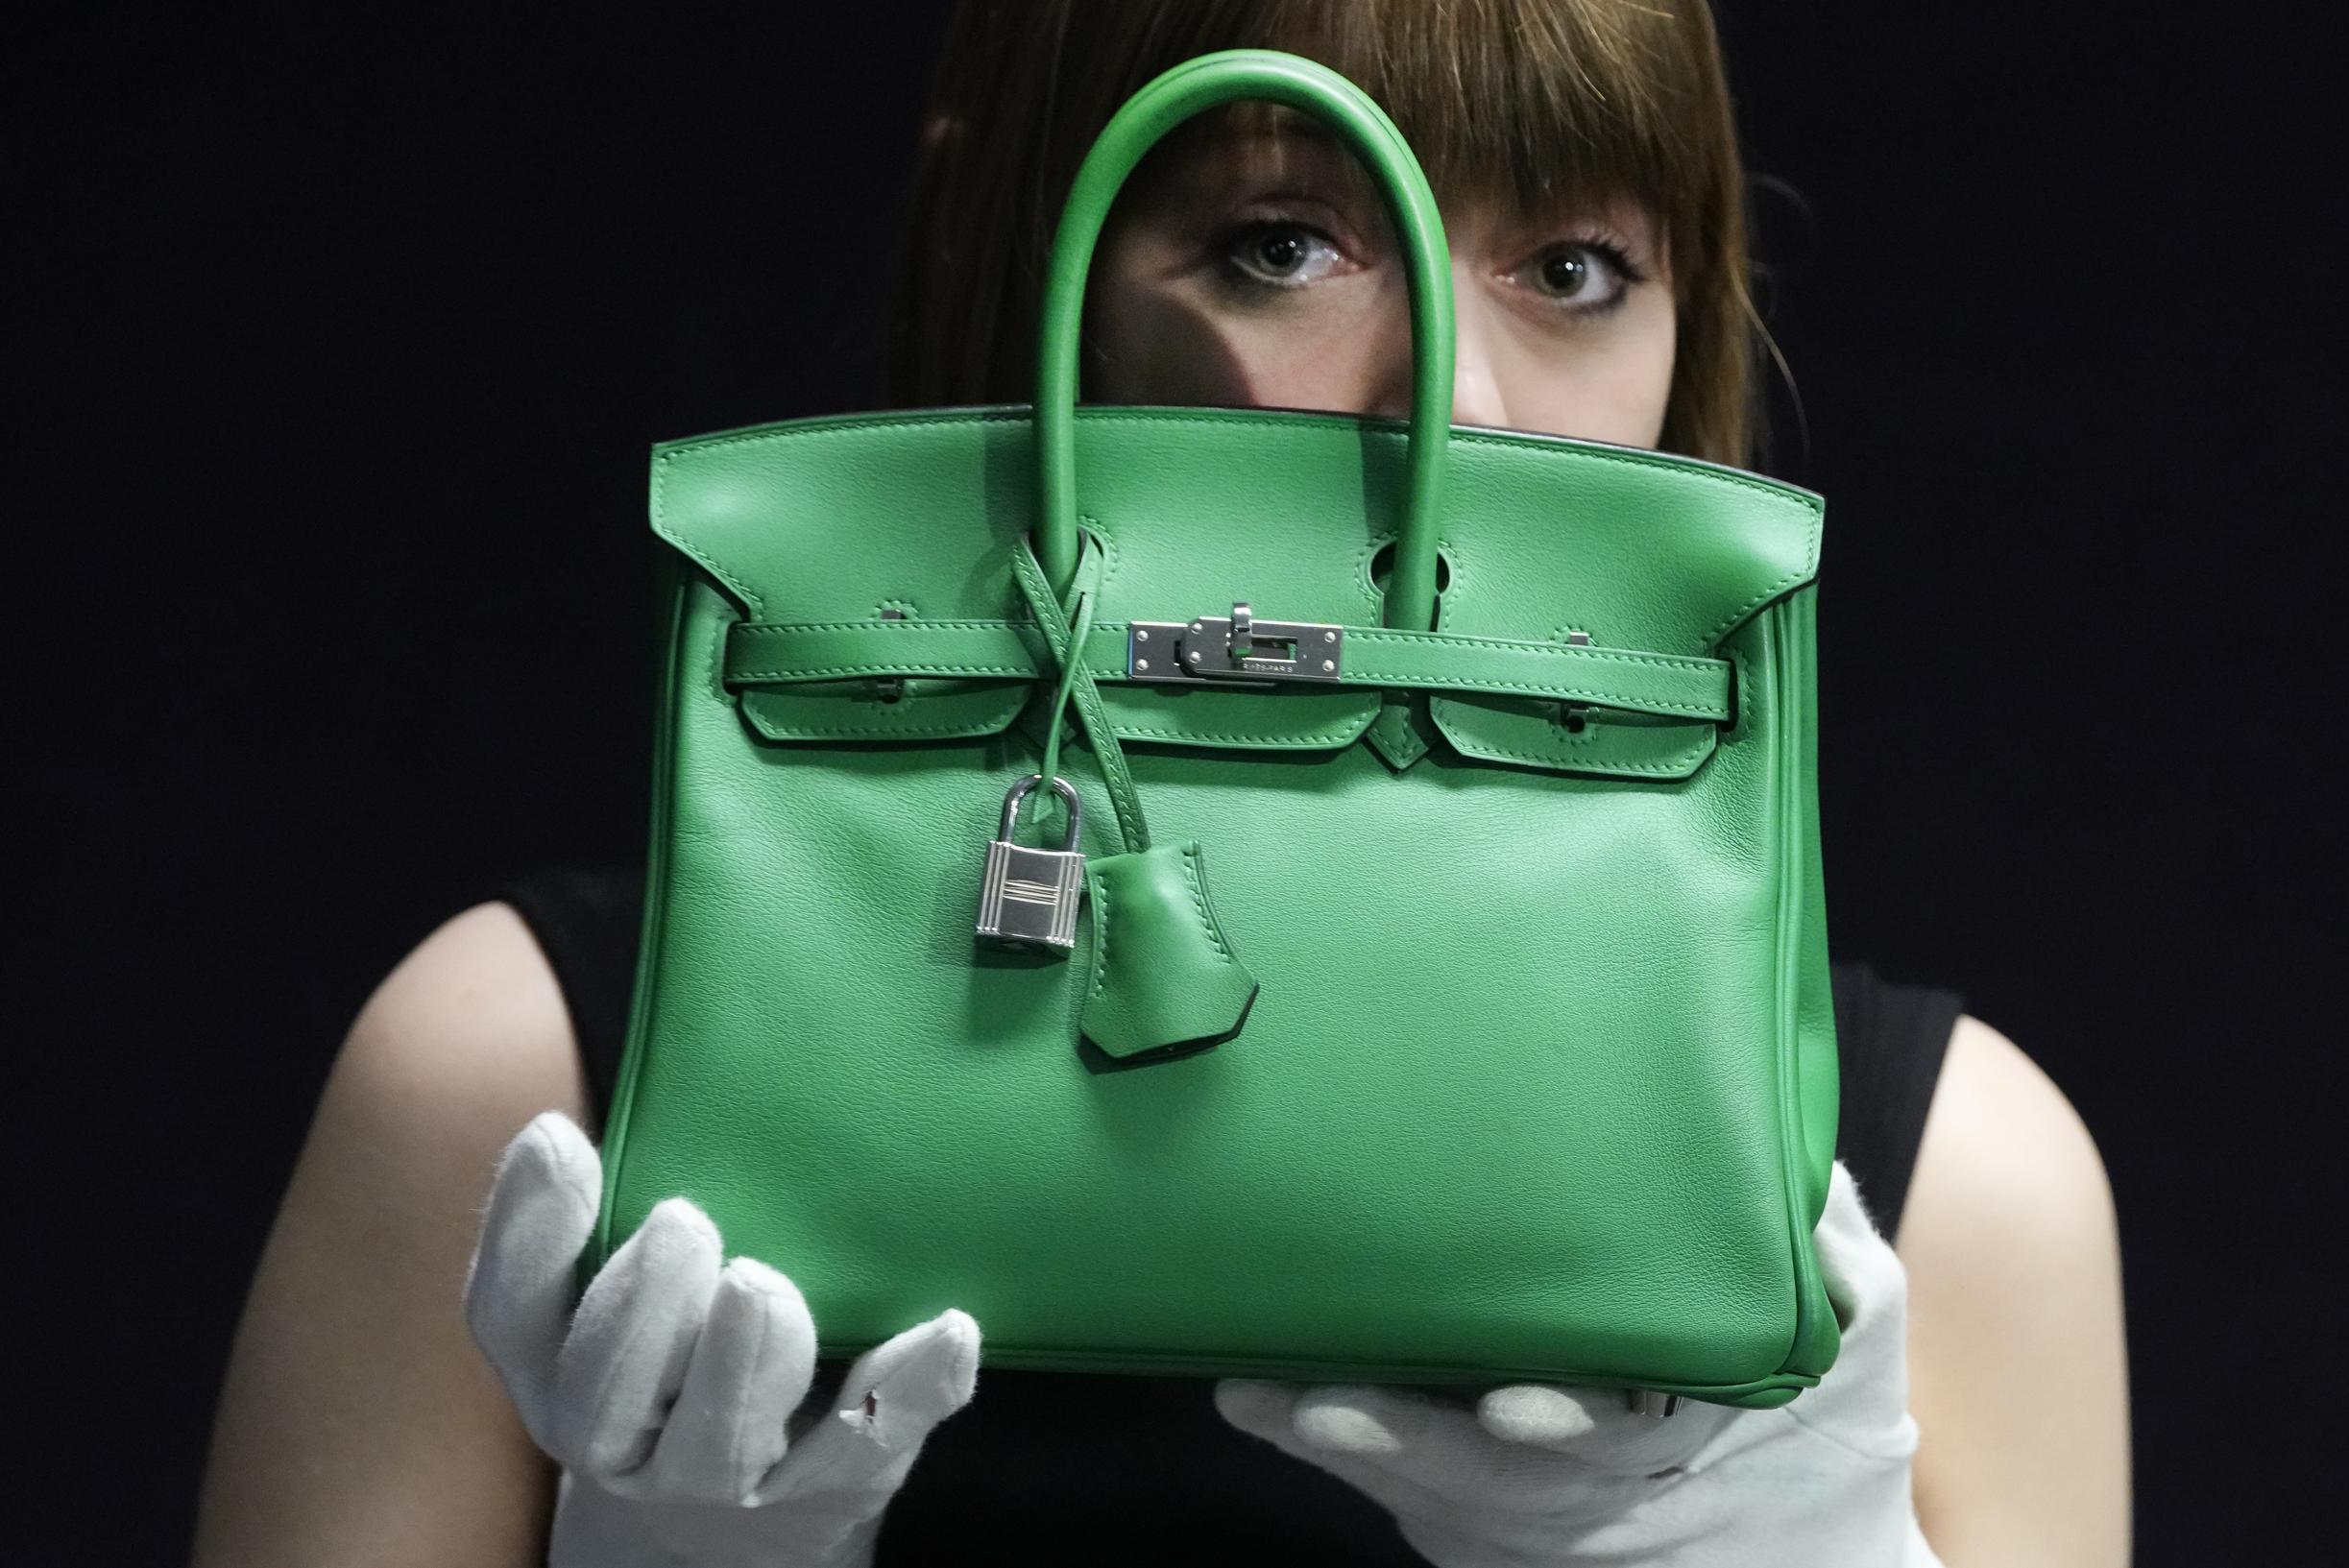 Americans suing Hermès for not being able to purchase a Birkin handbag